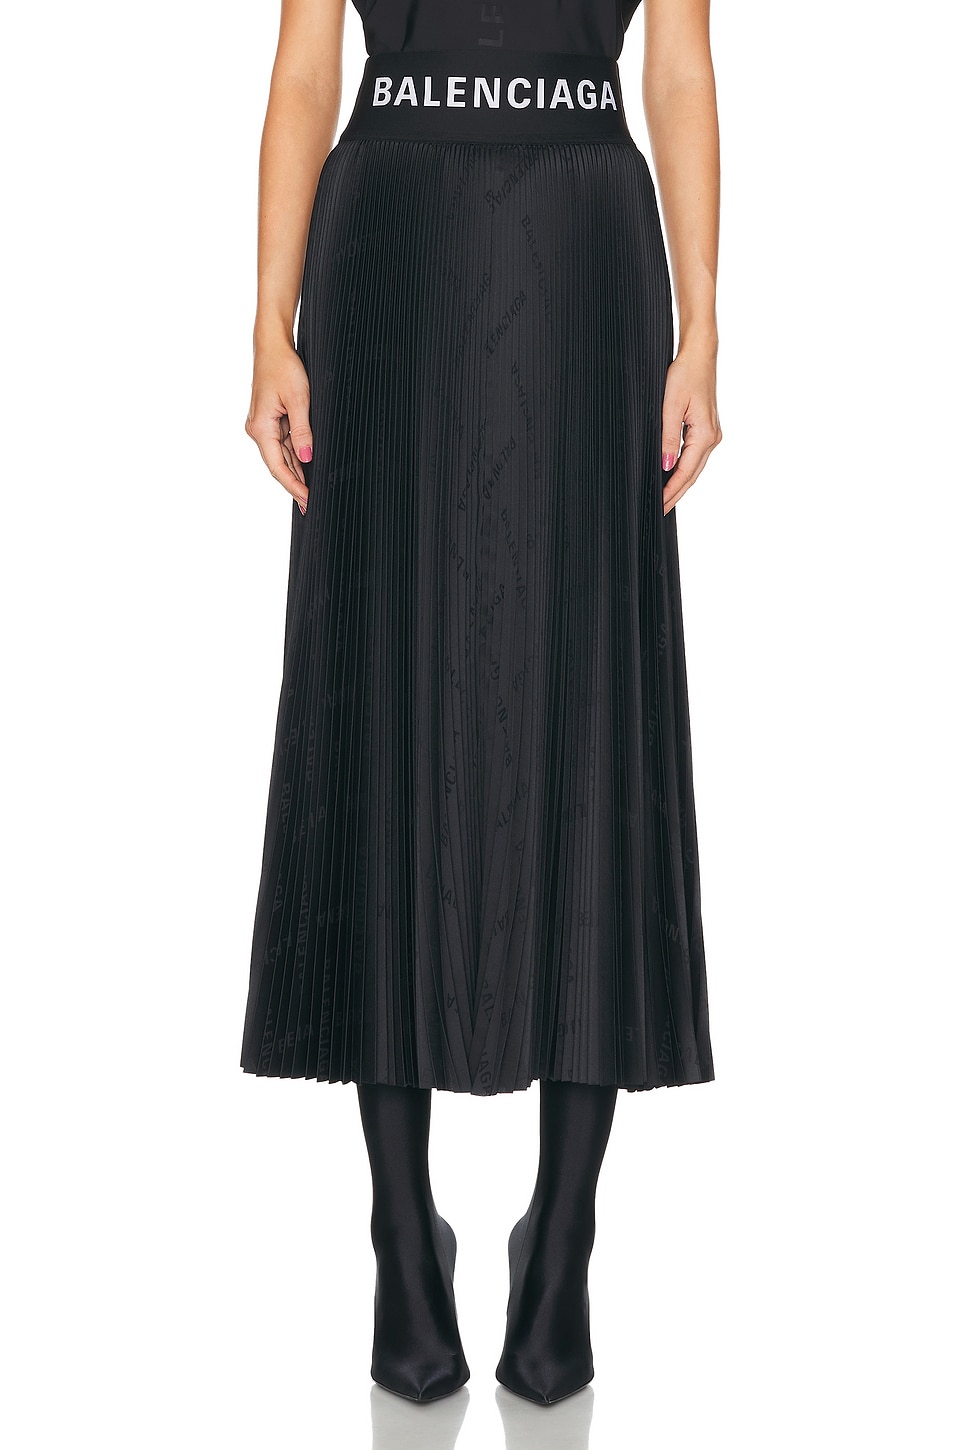 Image 1 of Balenciaga Pleated Skirt in Black